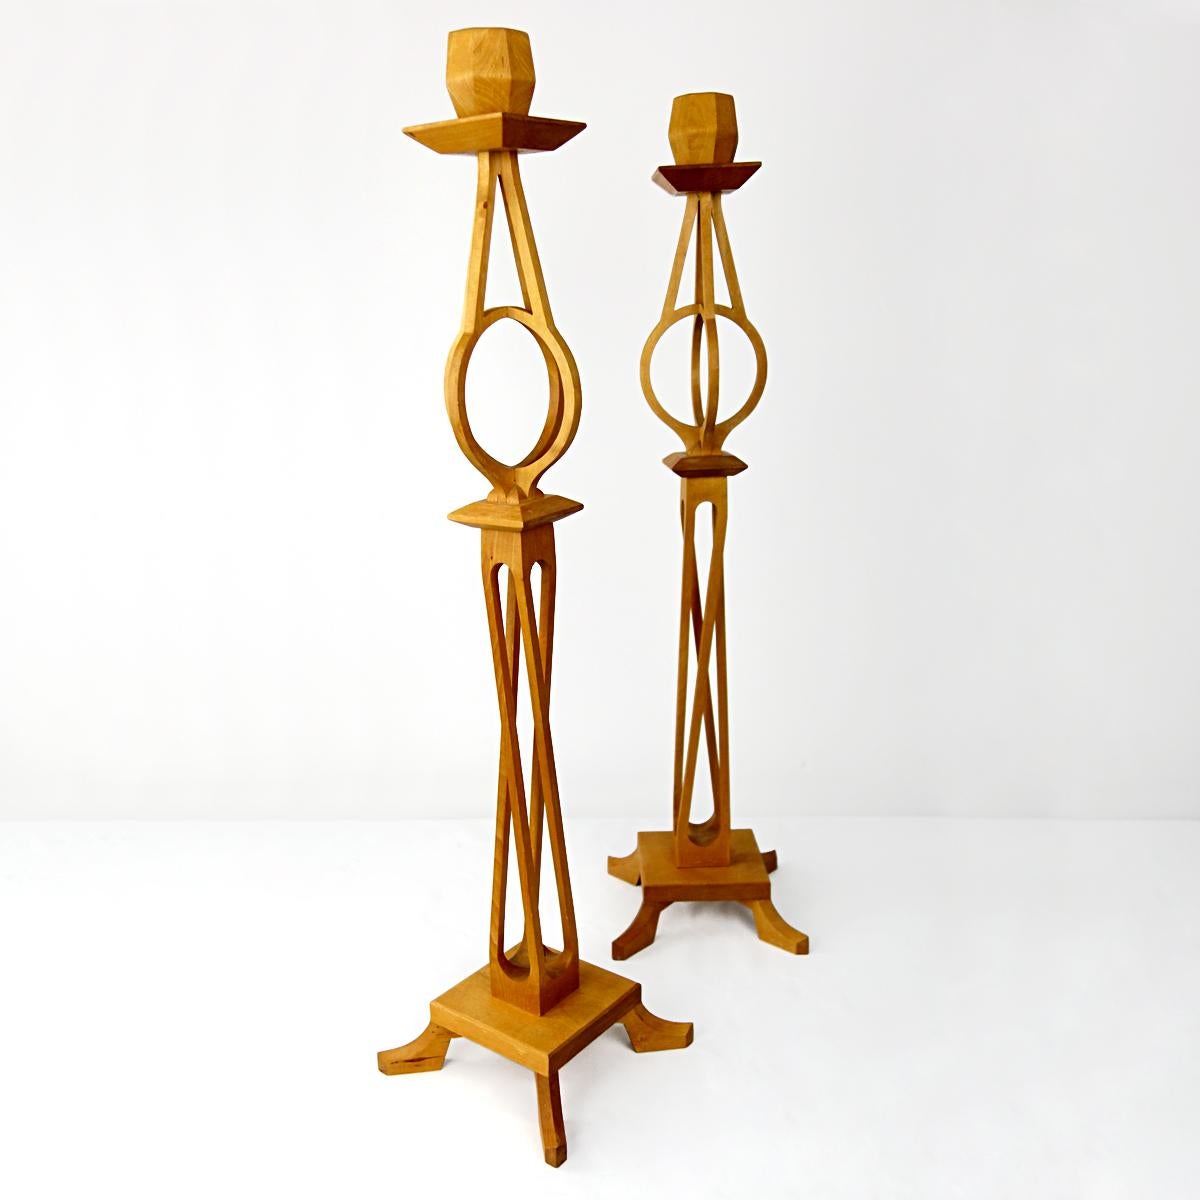 Elegant pair of candlesticks with an interesting Escher-esque design of intertwining wood. With their height of 82 cm / 32.3 inch these are real statement pieces.
The candlesticks are marked 